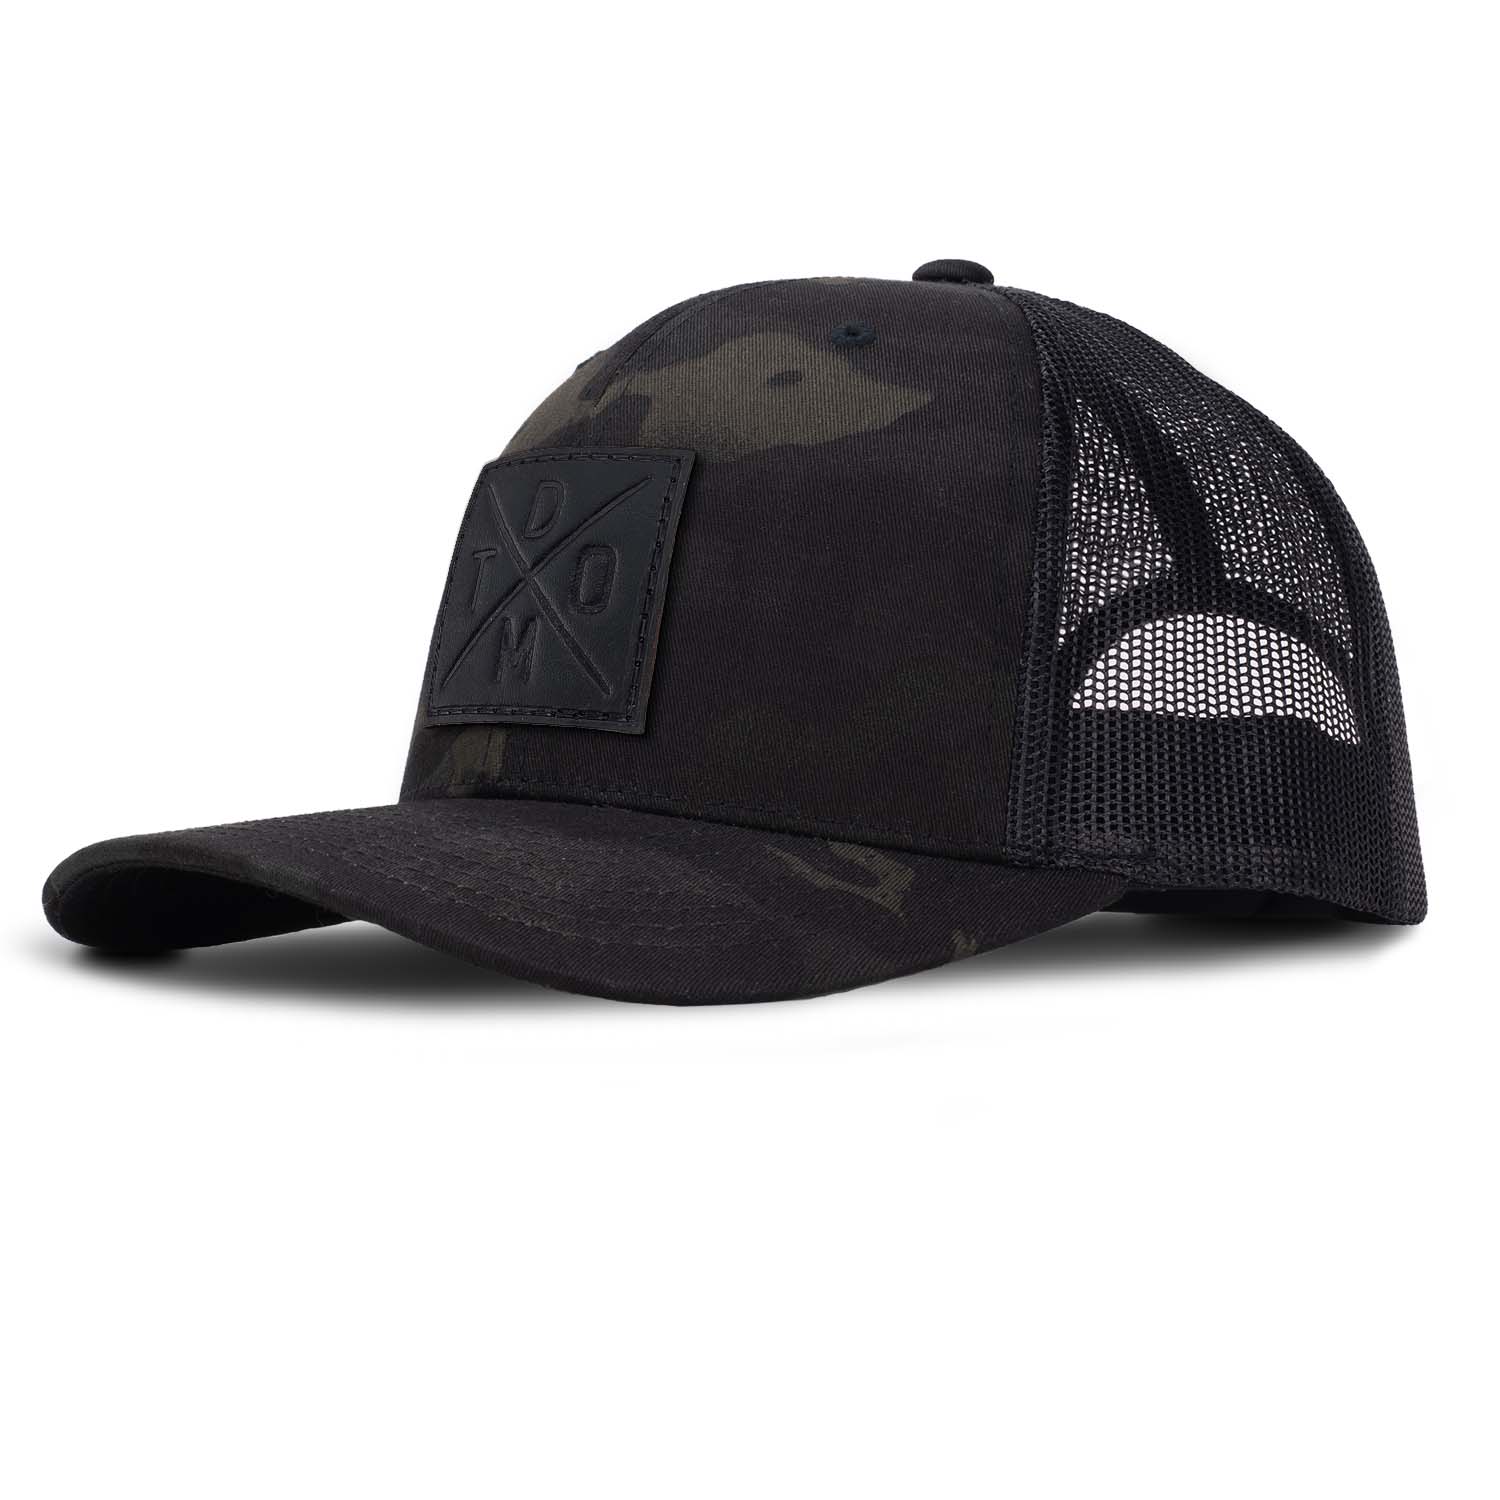 Black Don't Tread on Me debossed full grain leather patch on a Multicam Black classic trucker hat